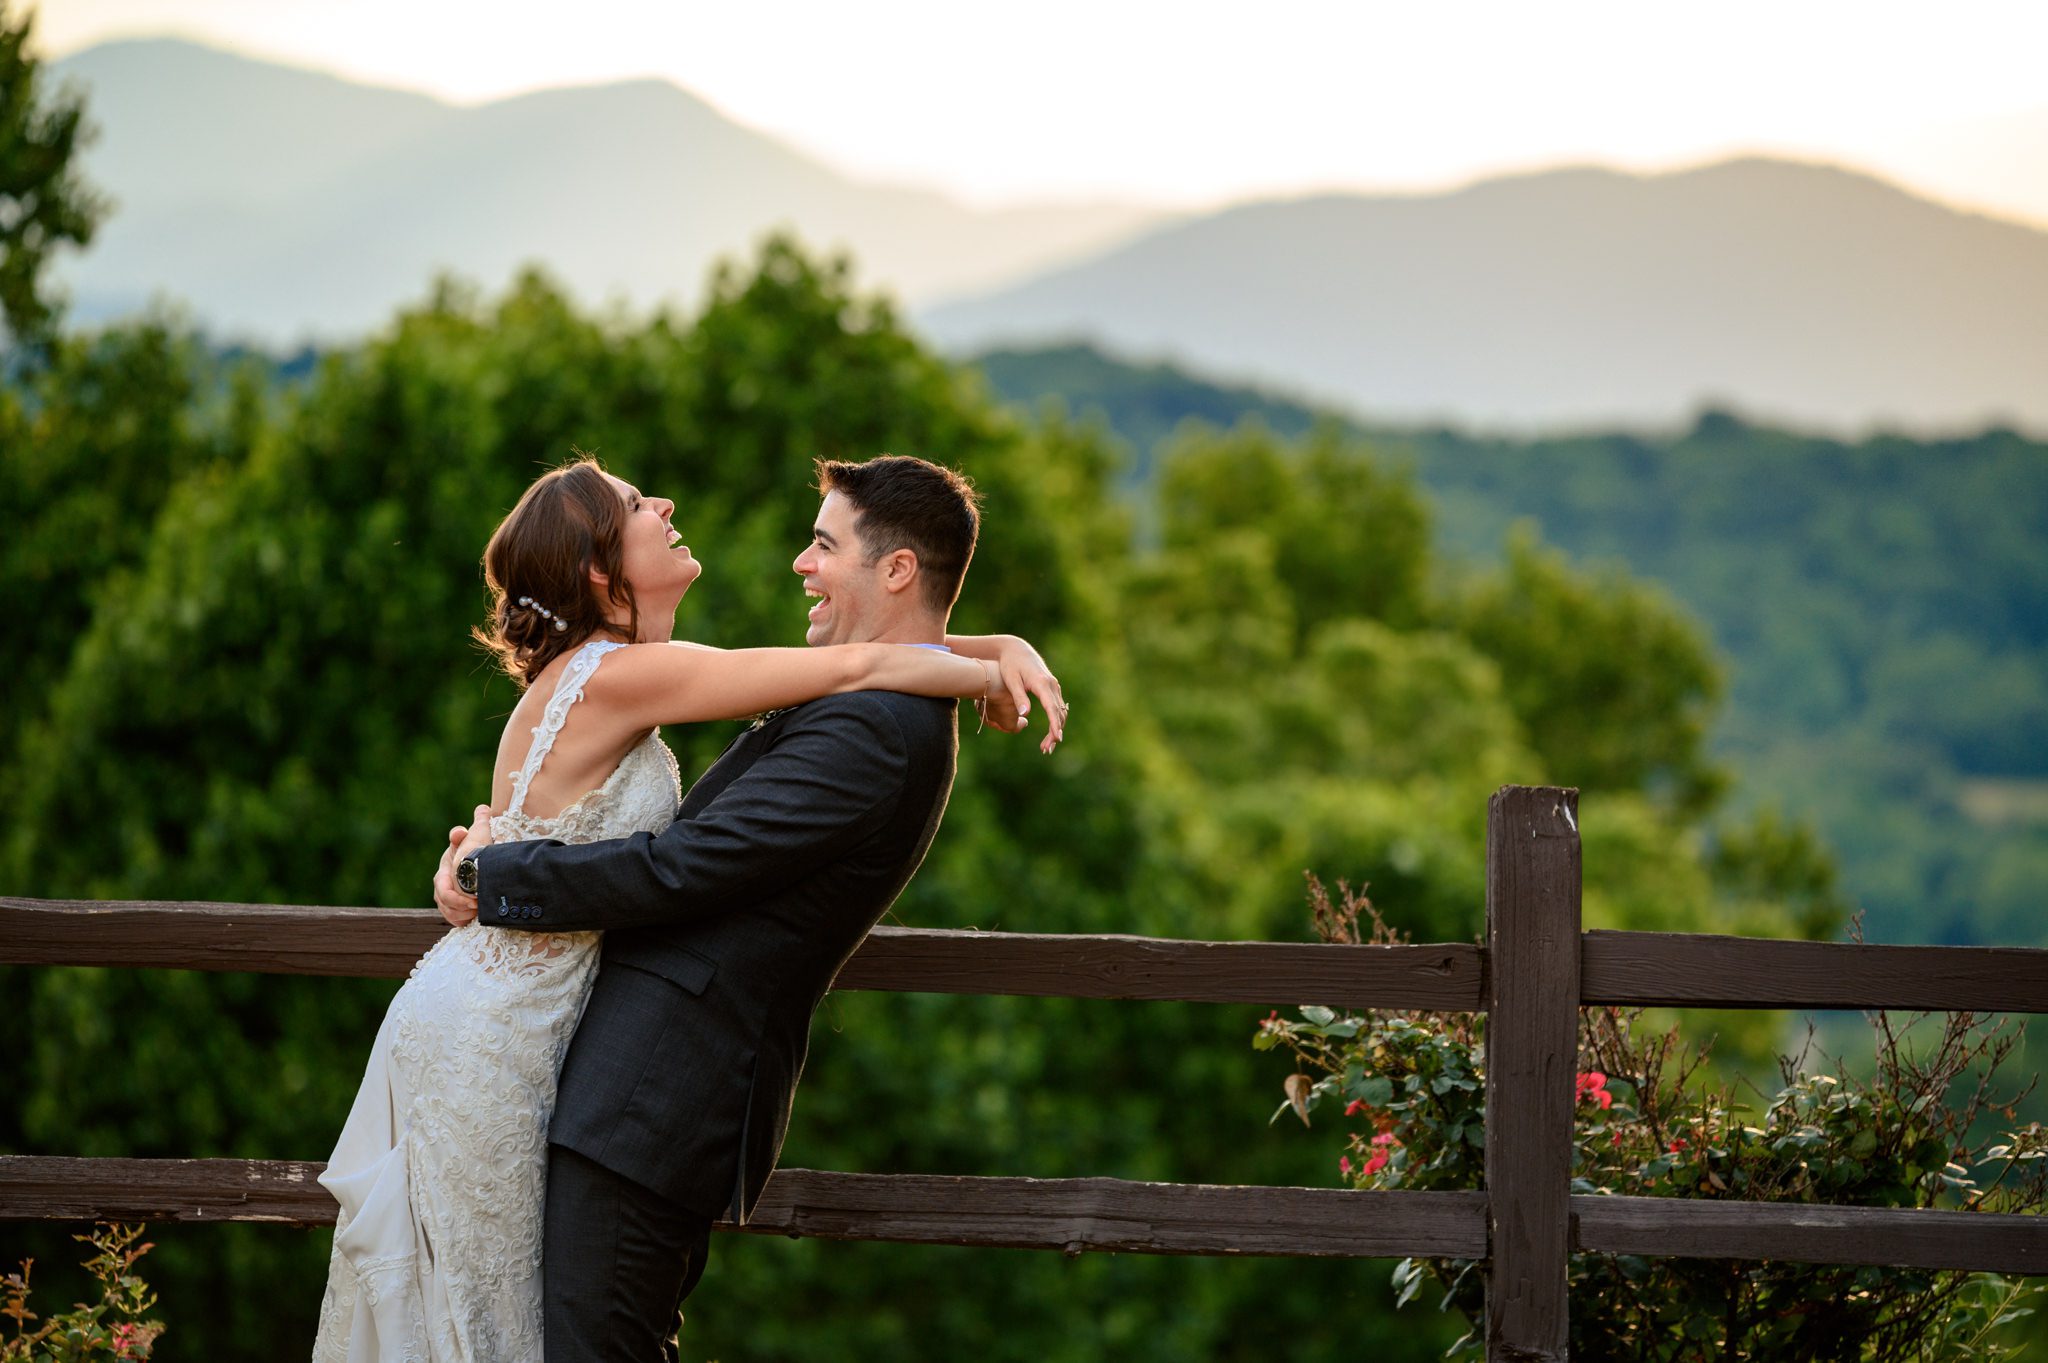 A bride and groom hugging on a fence with mountains in the background captured by a documentary wedding photographer at Crest Pavilion.